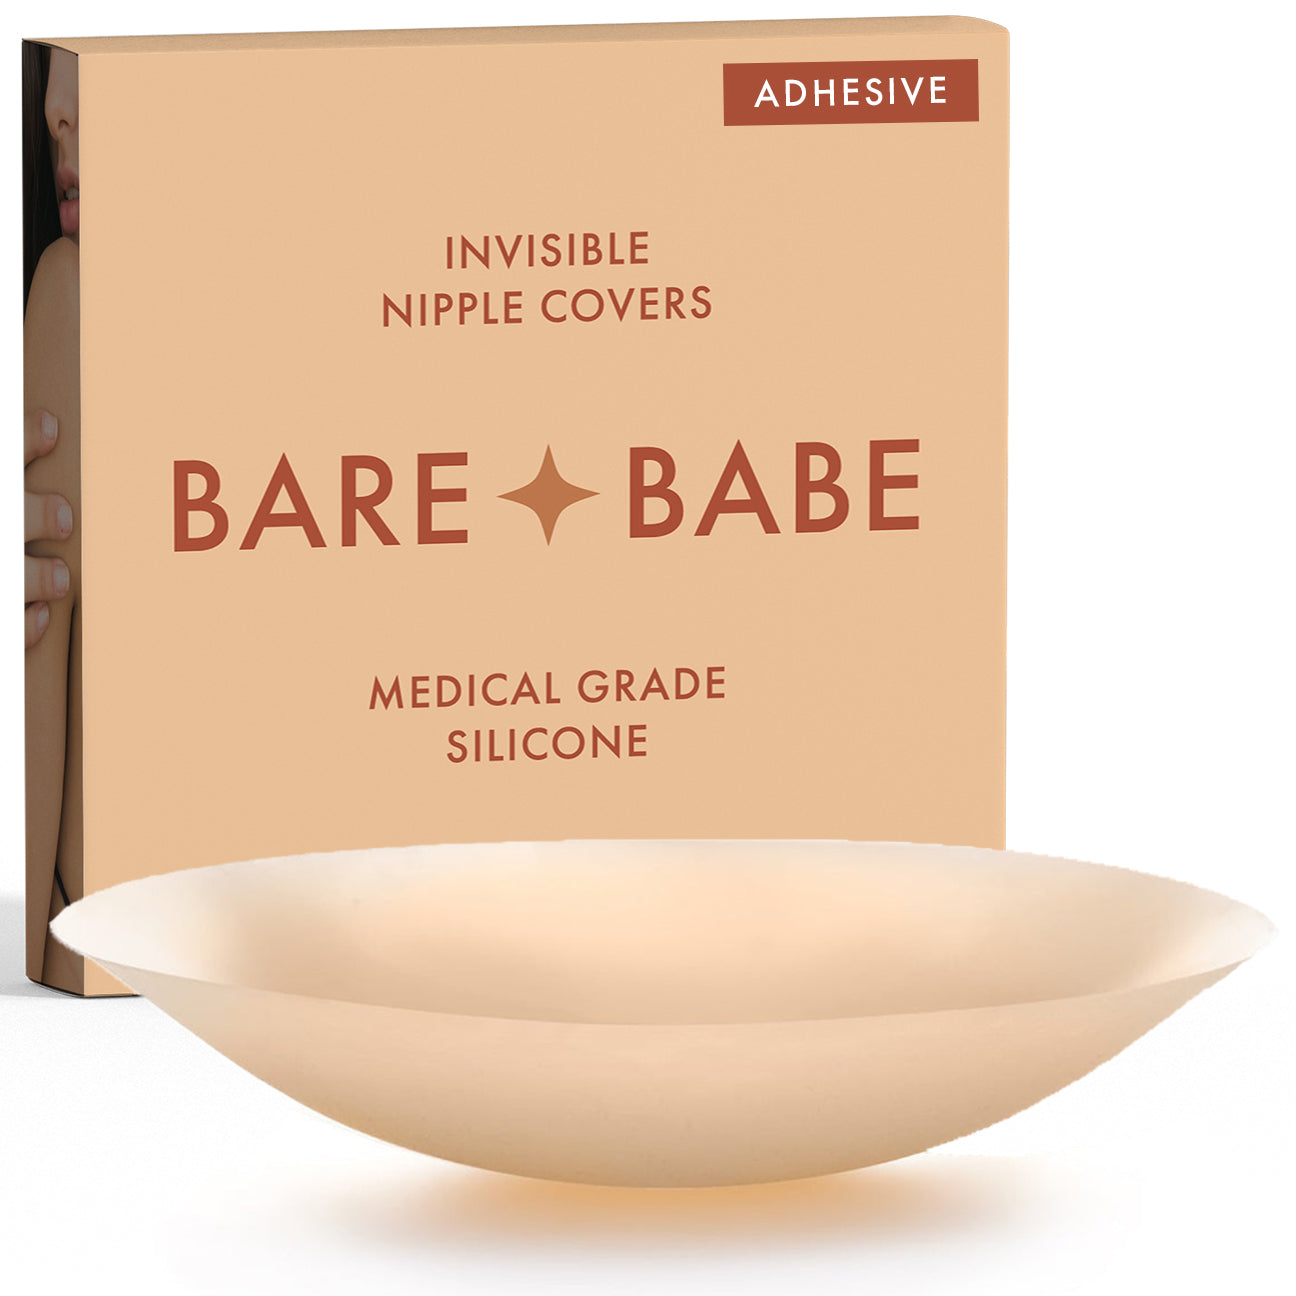 Bare Babe Adhesive Nipple Cover in Honey